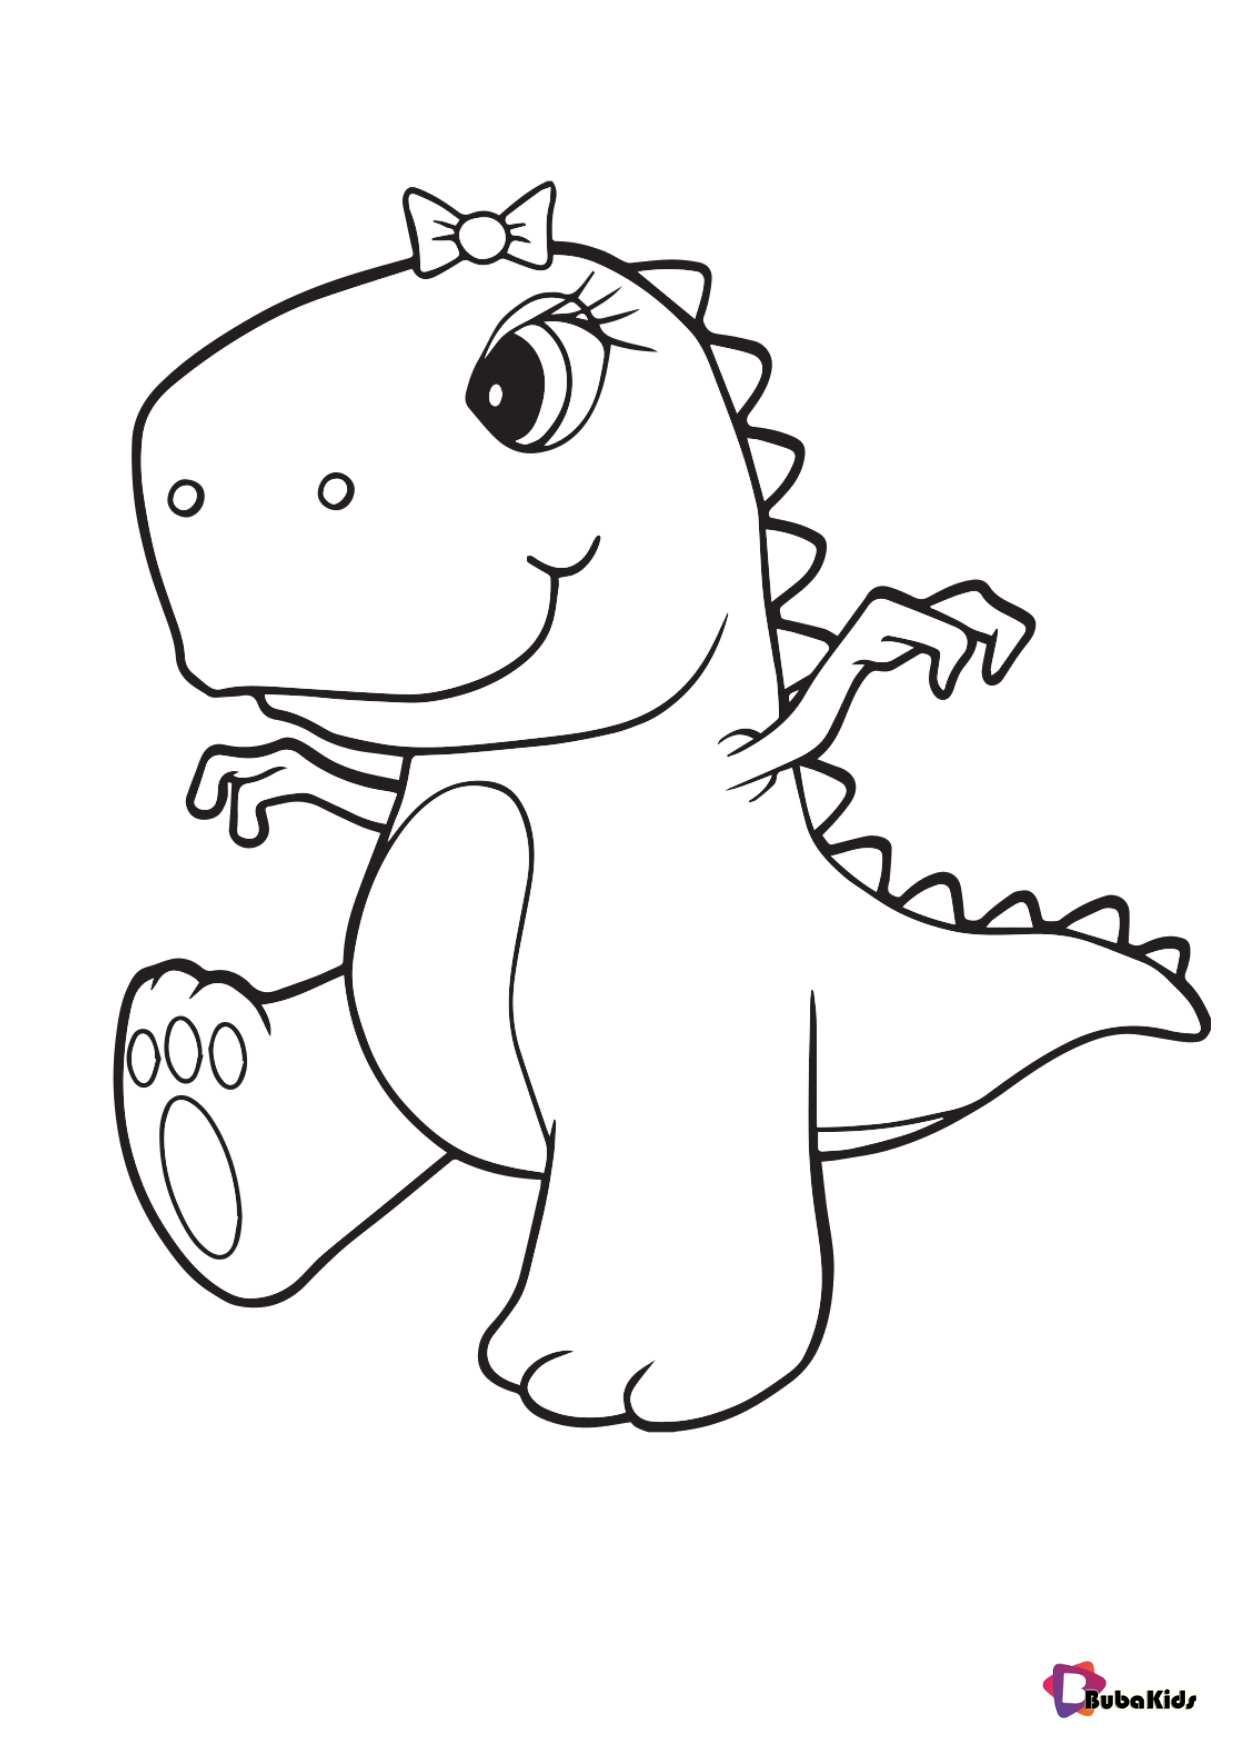 Cute little dinosaur baby colouring pages